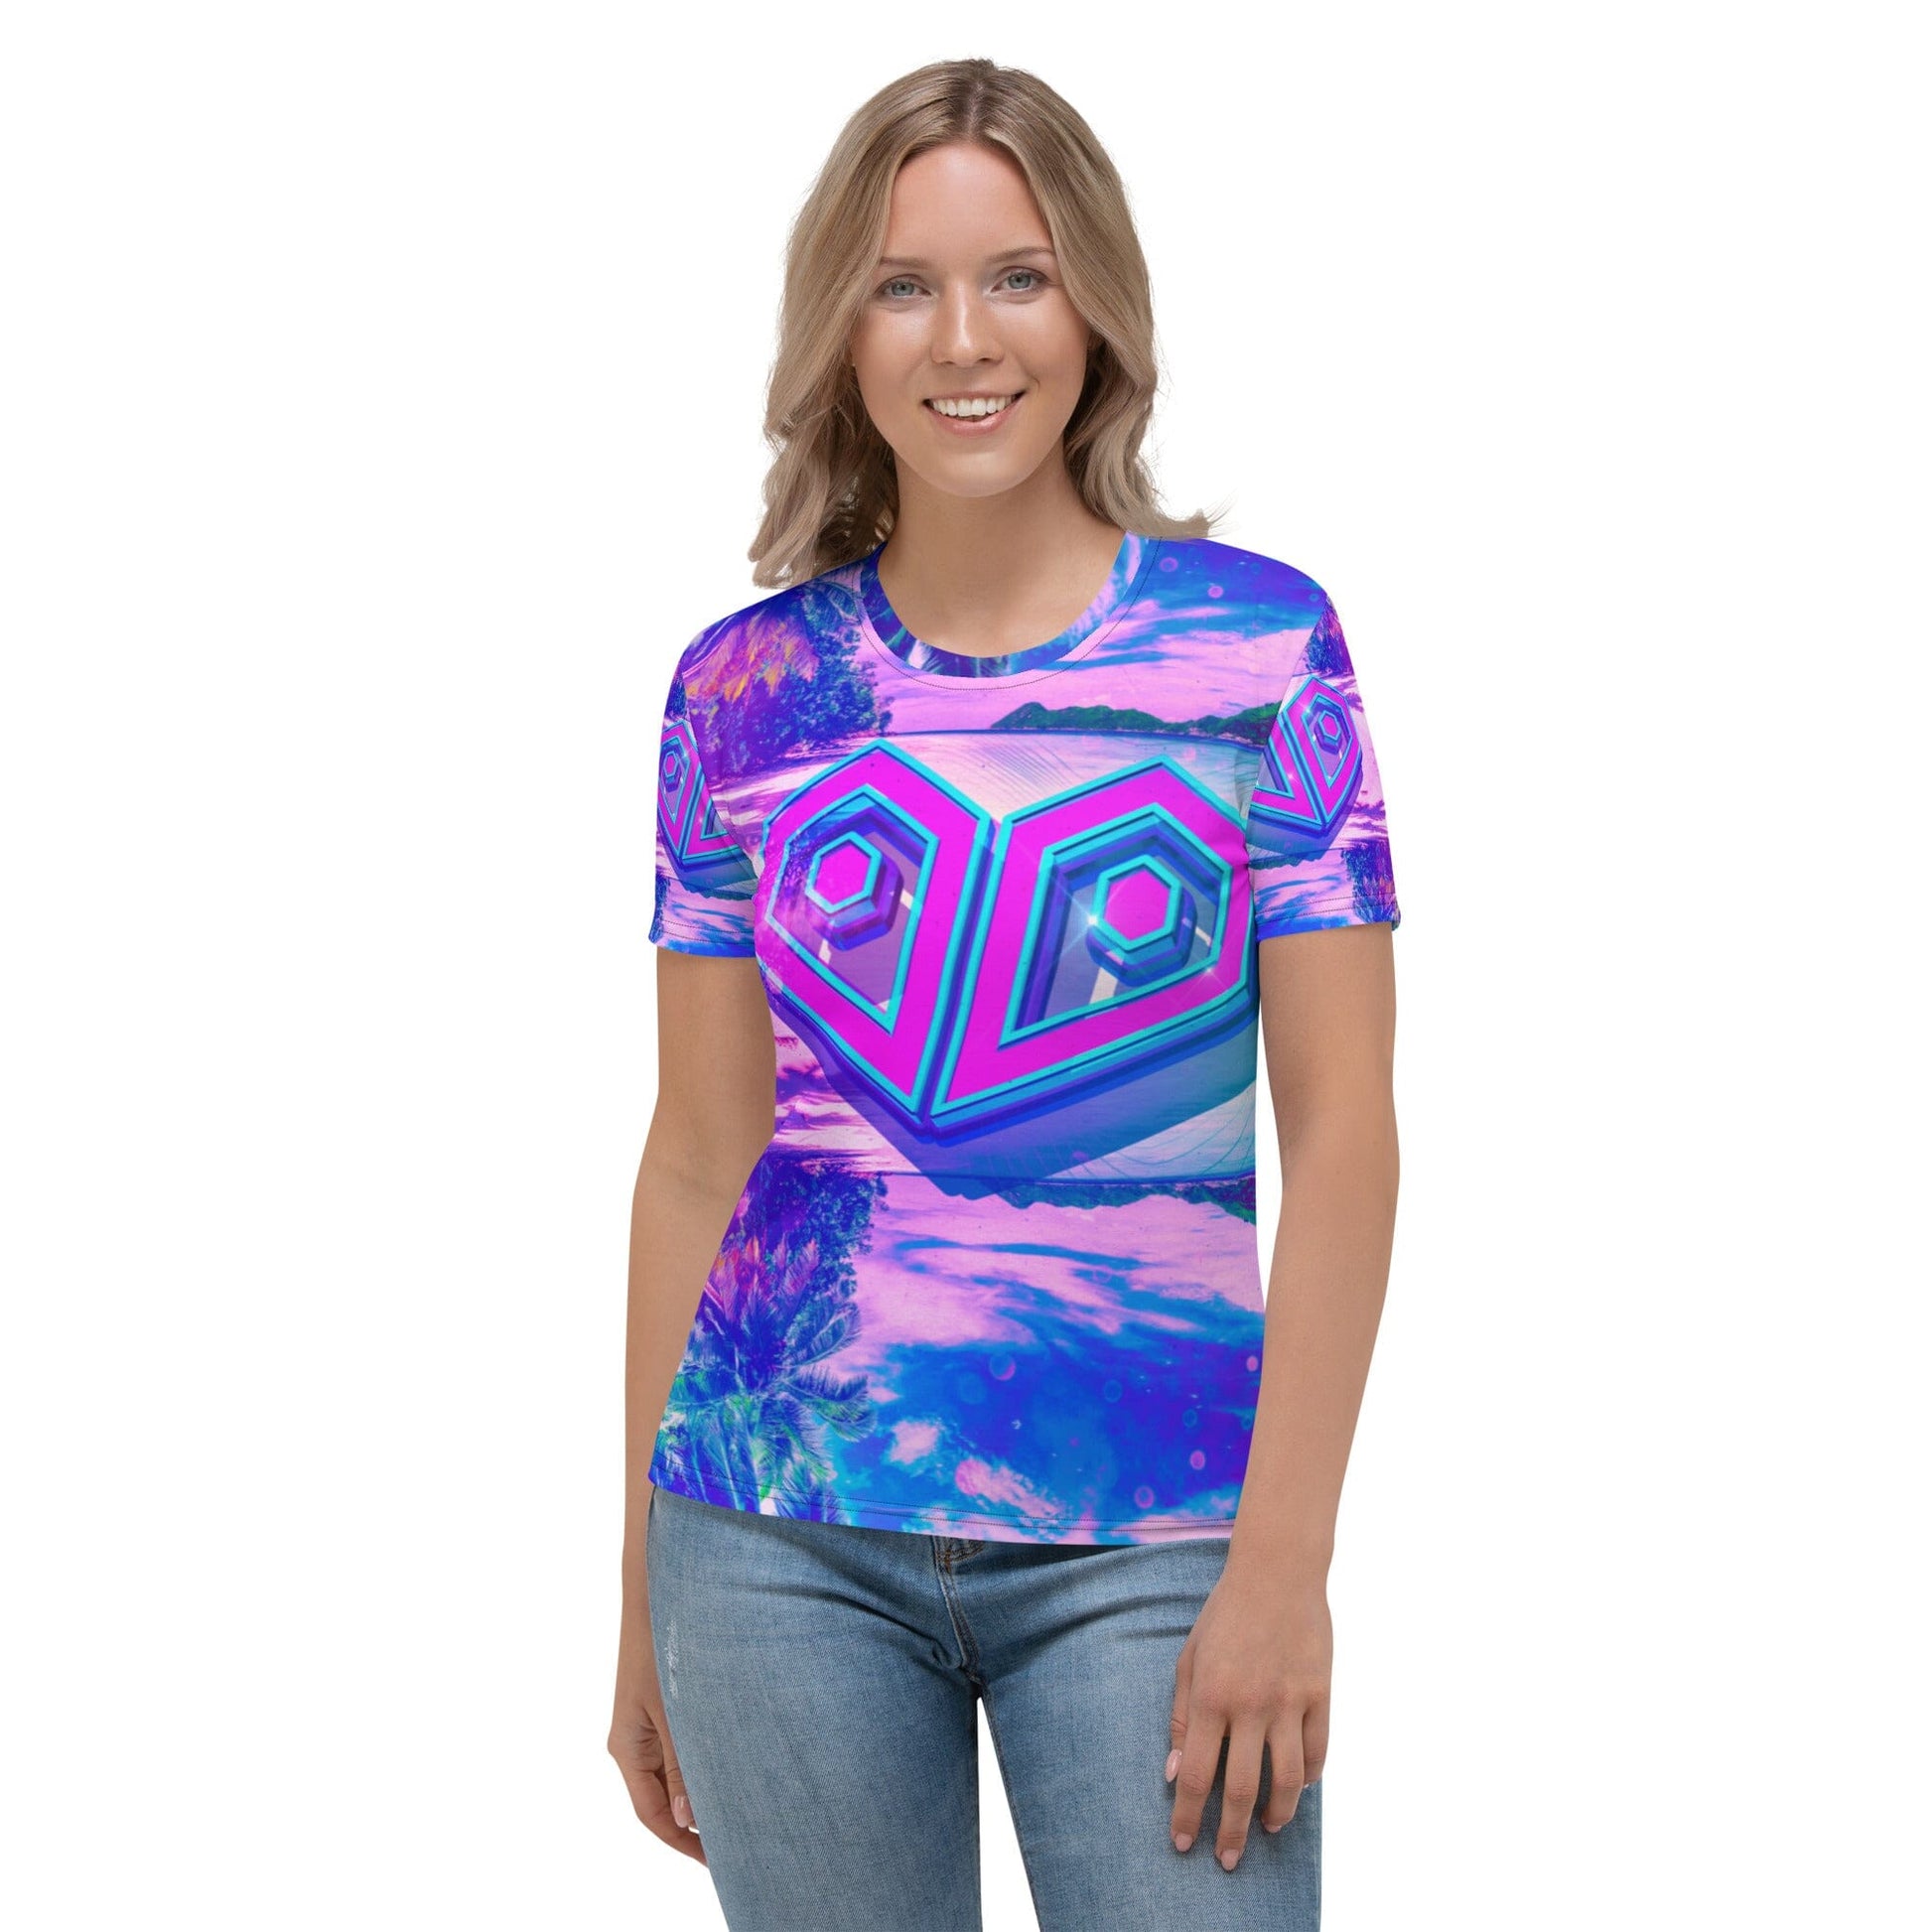 On a Different Vibe Women's T-Shirt PLURTHLINGS XS 